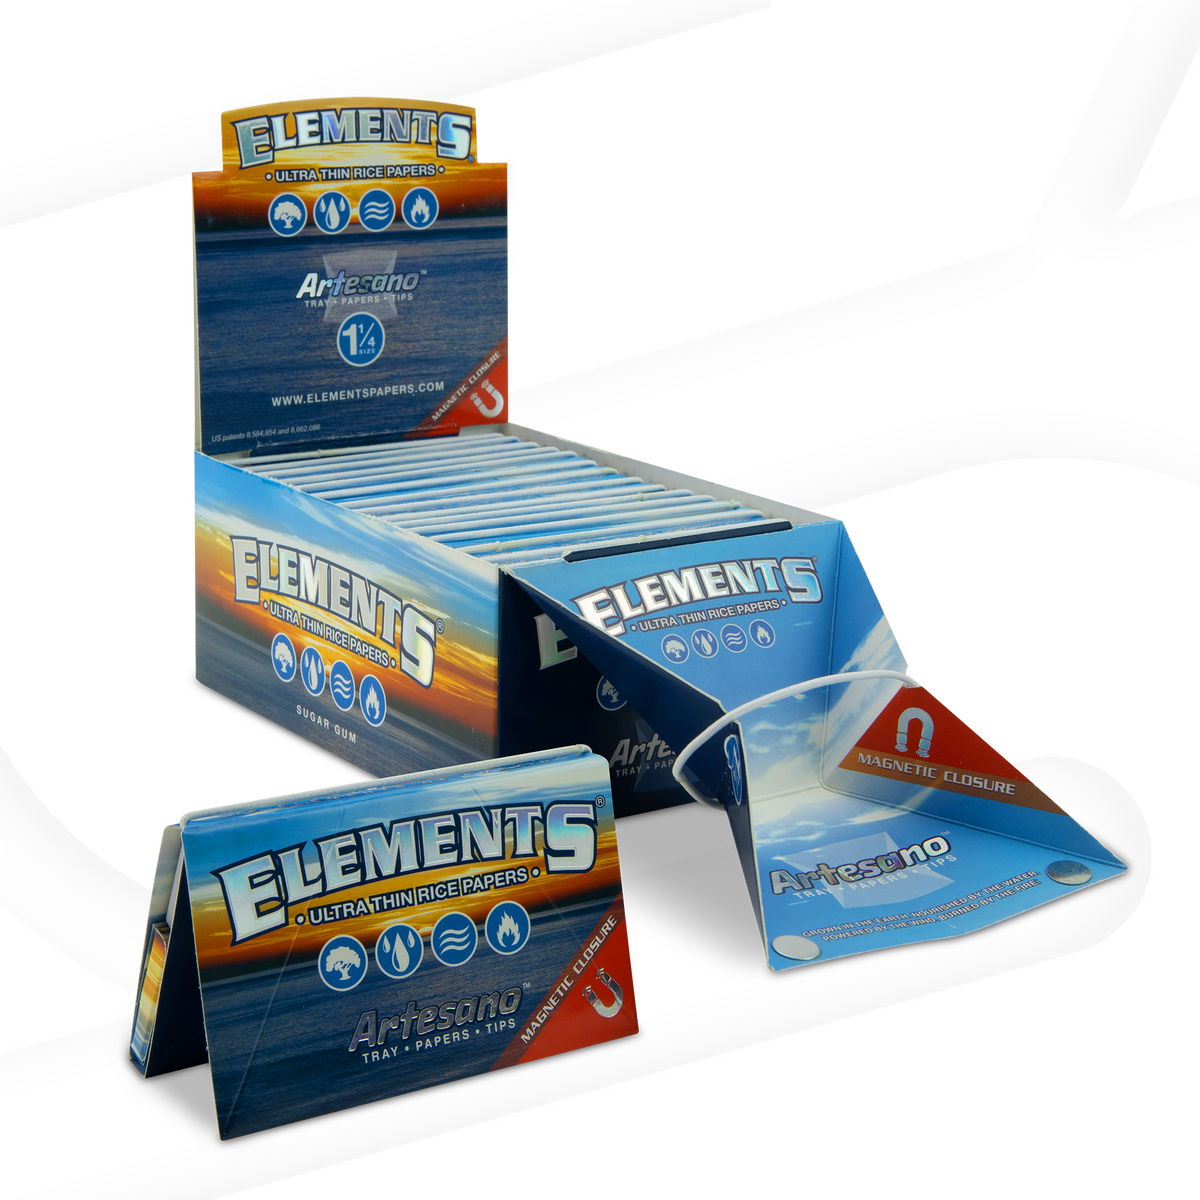 Elements Artesano 1 1/4 Rice Rolling Papers Rolling Papers ELE10070-MUSA01 esd-official